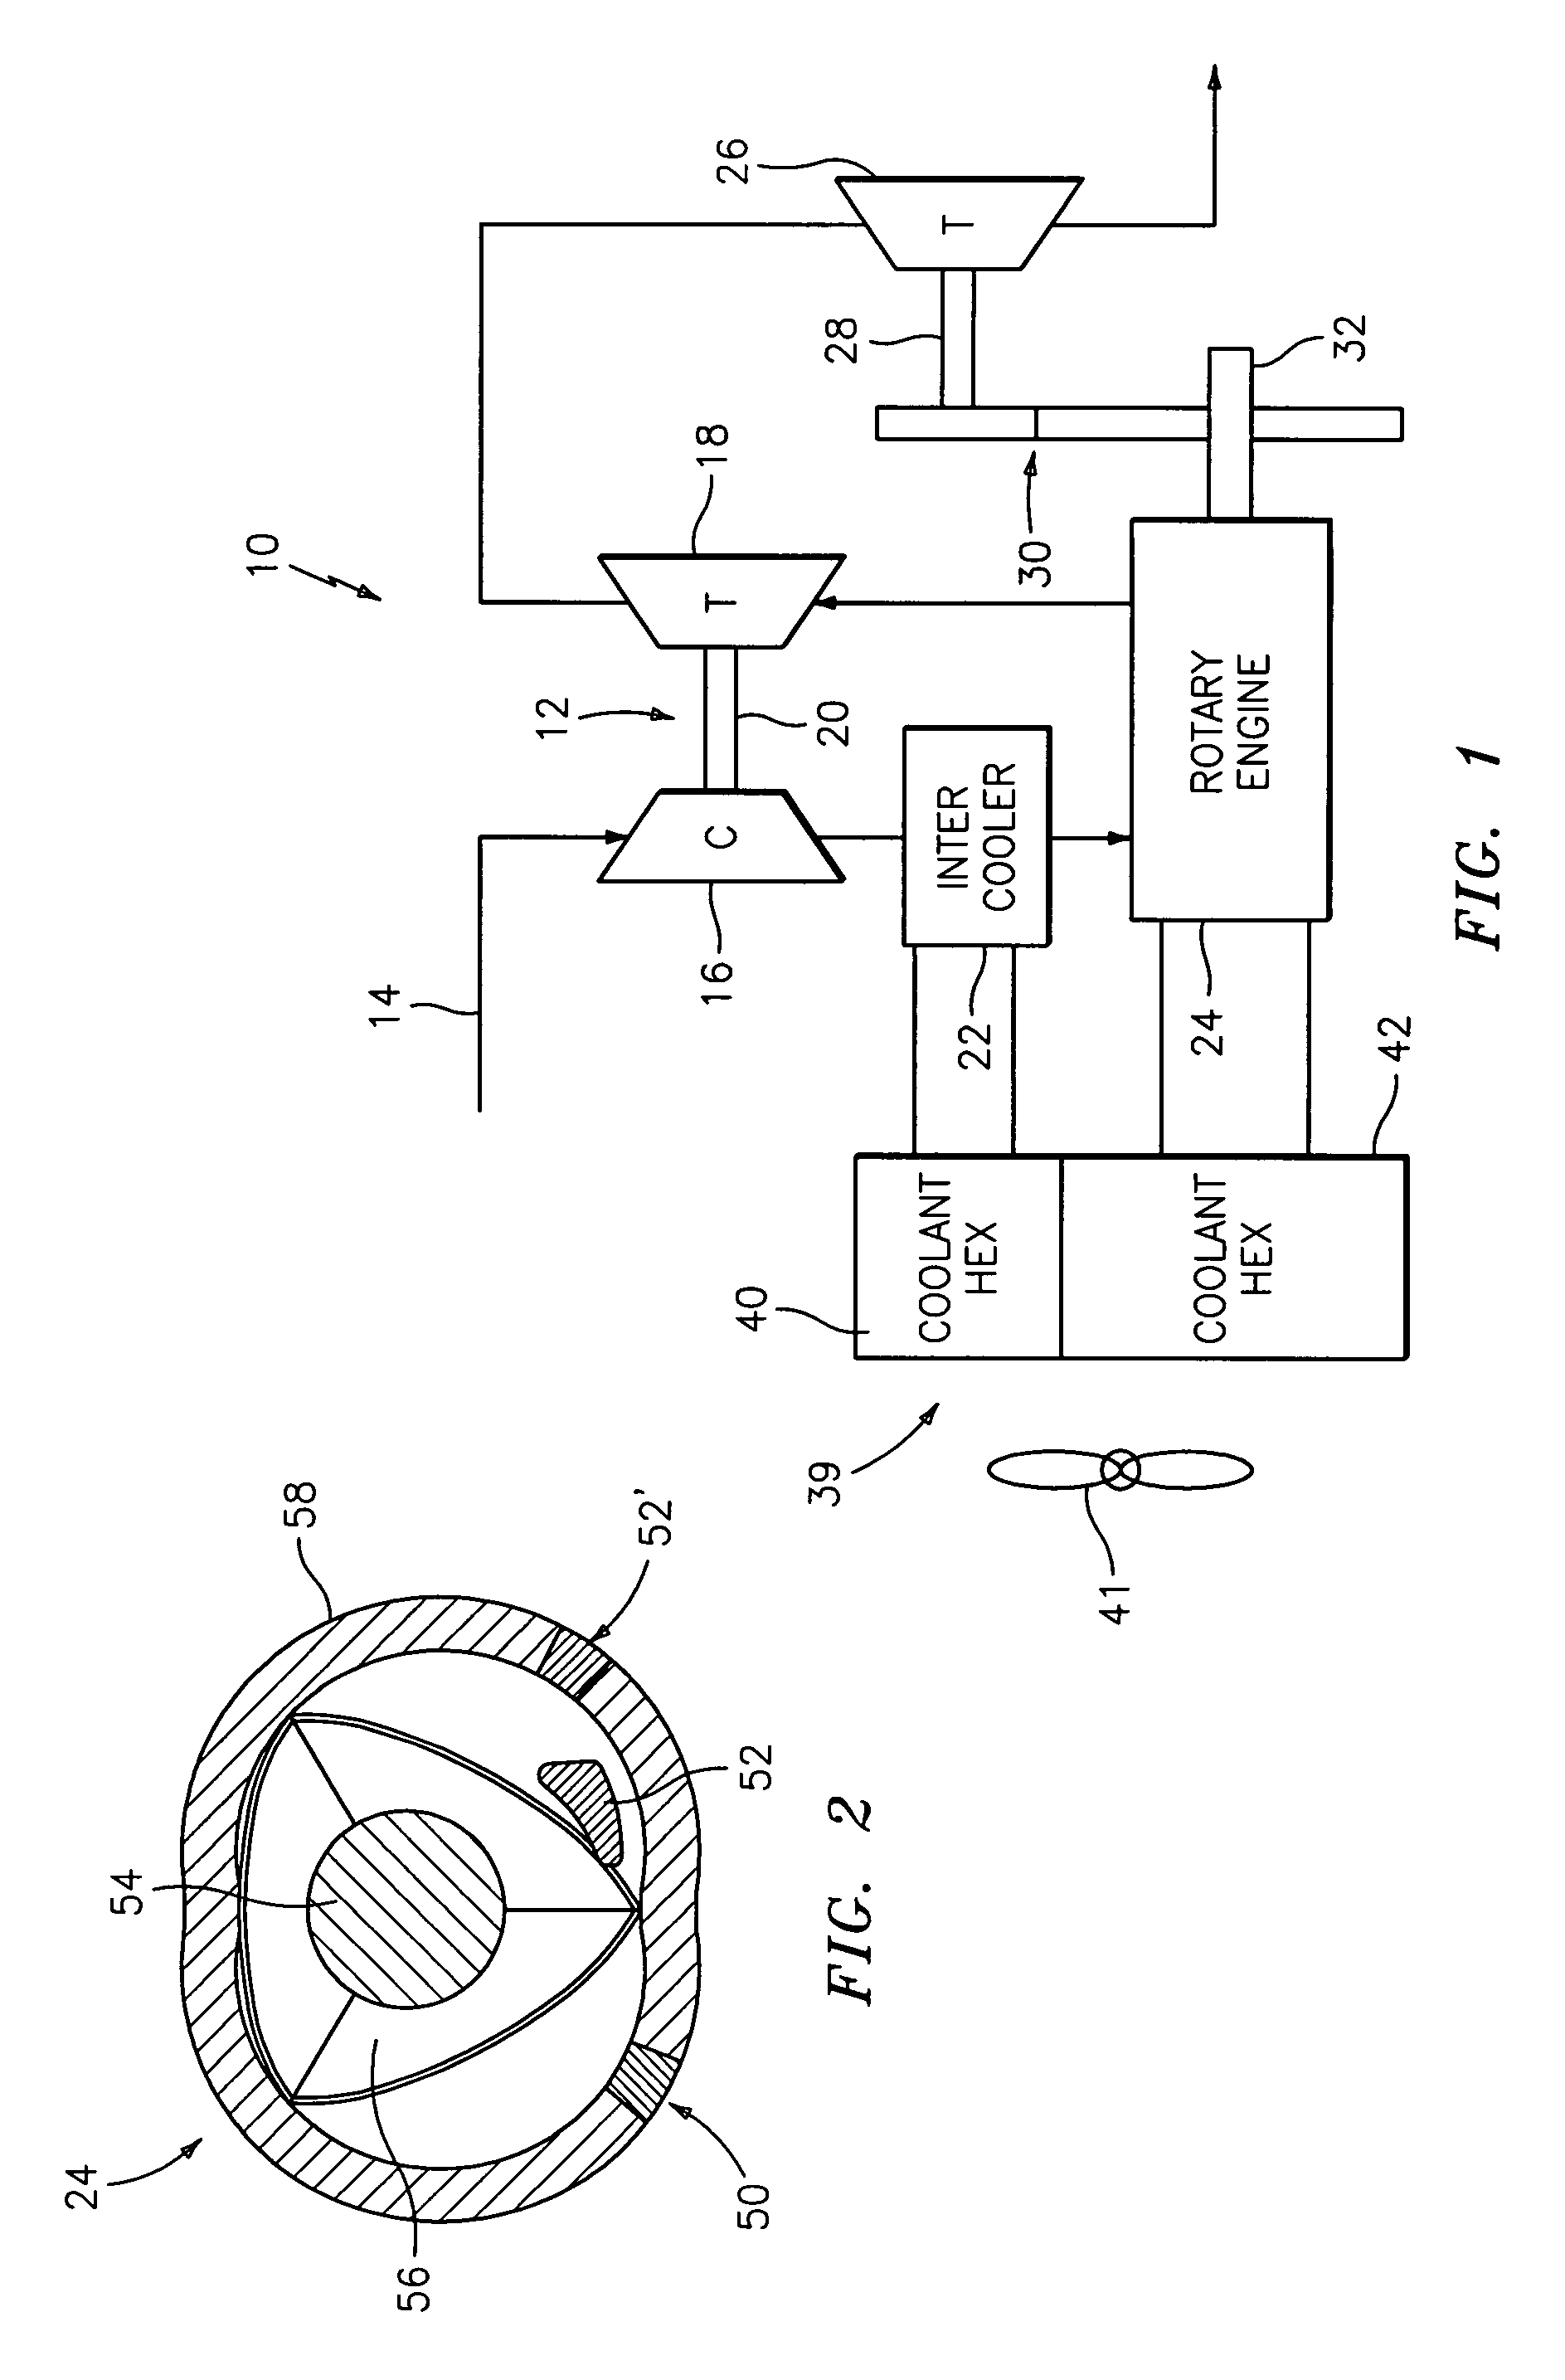 Compound cycle rotary engine